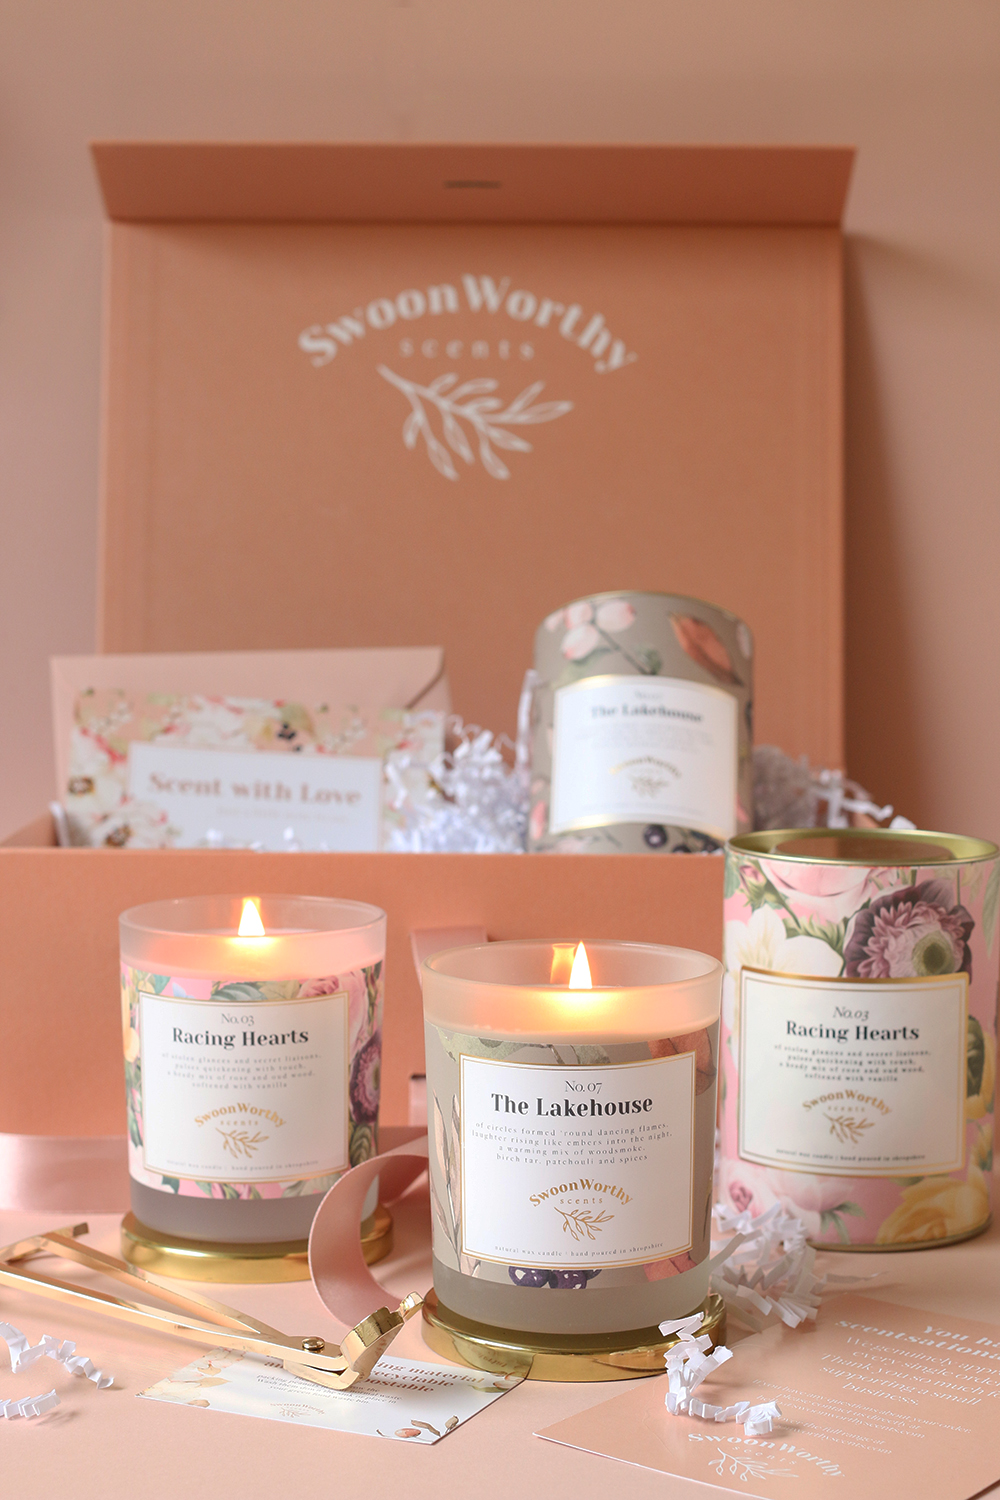 Two candle gift box from Swoon Worthy Scents